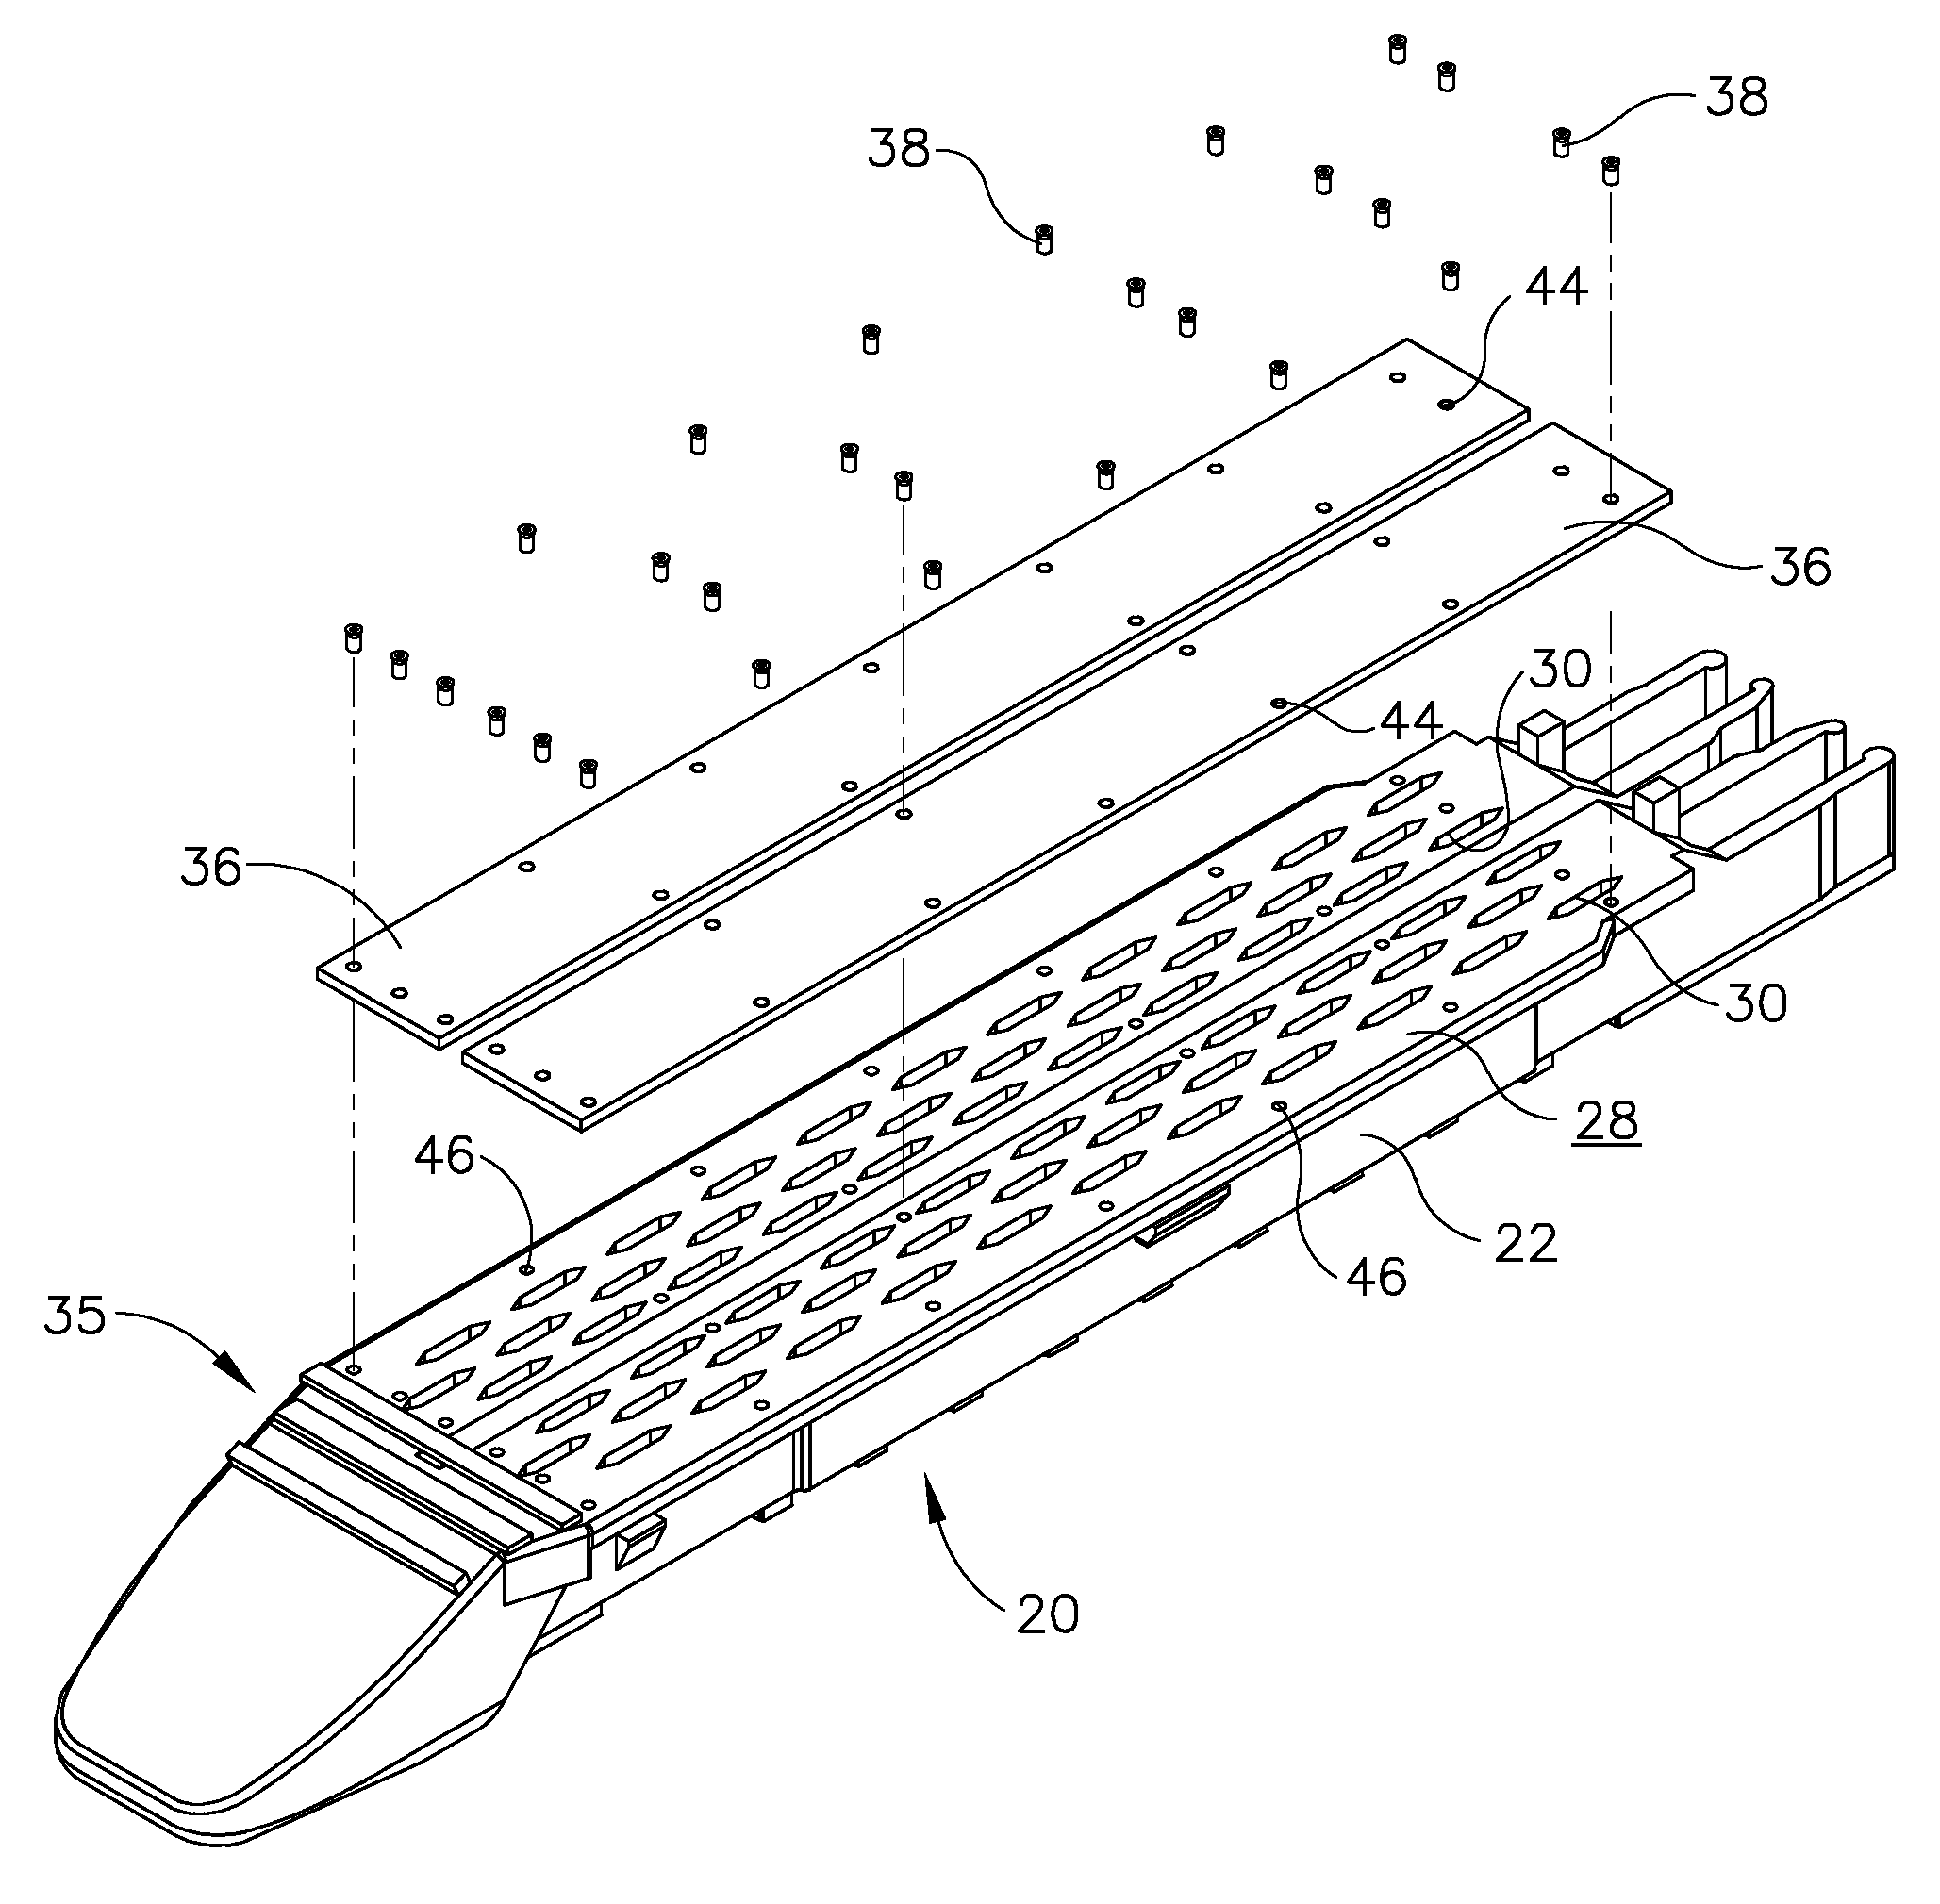 Surgical end effector having buttress retention features